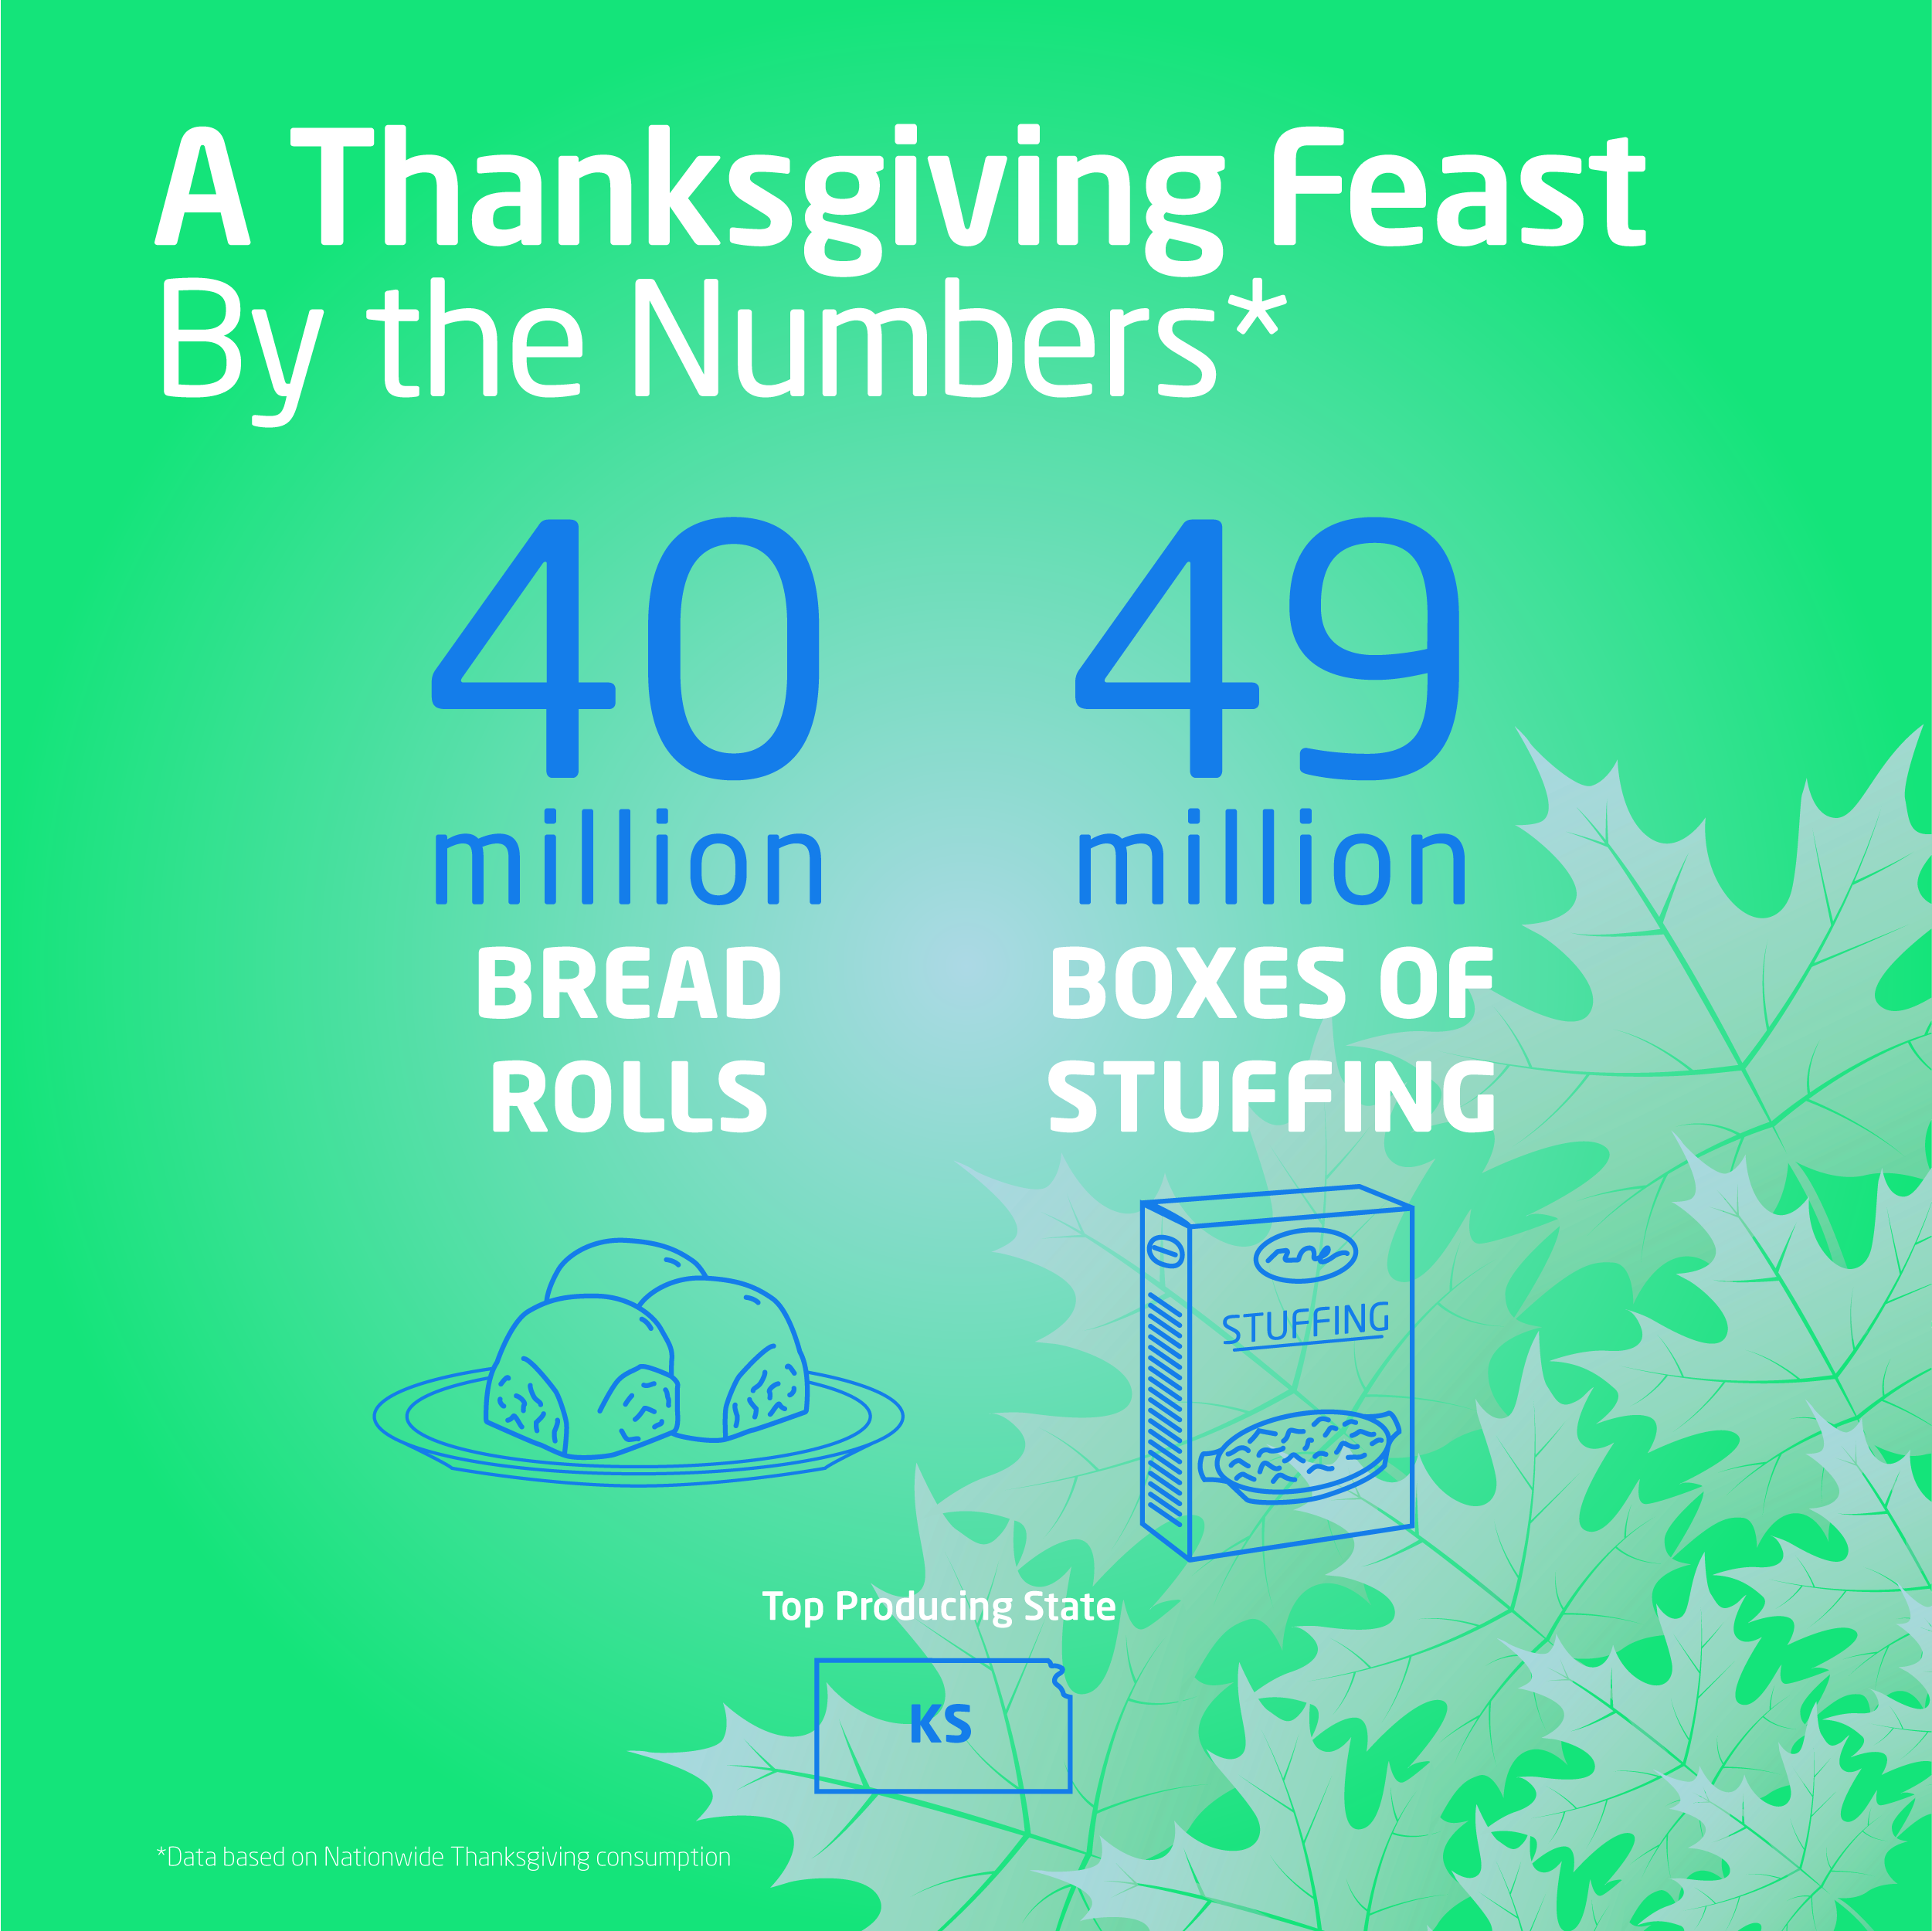 Thanksgiving Rolls and Stuffing by the Numbers